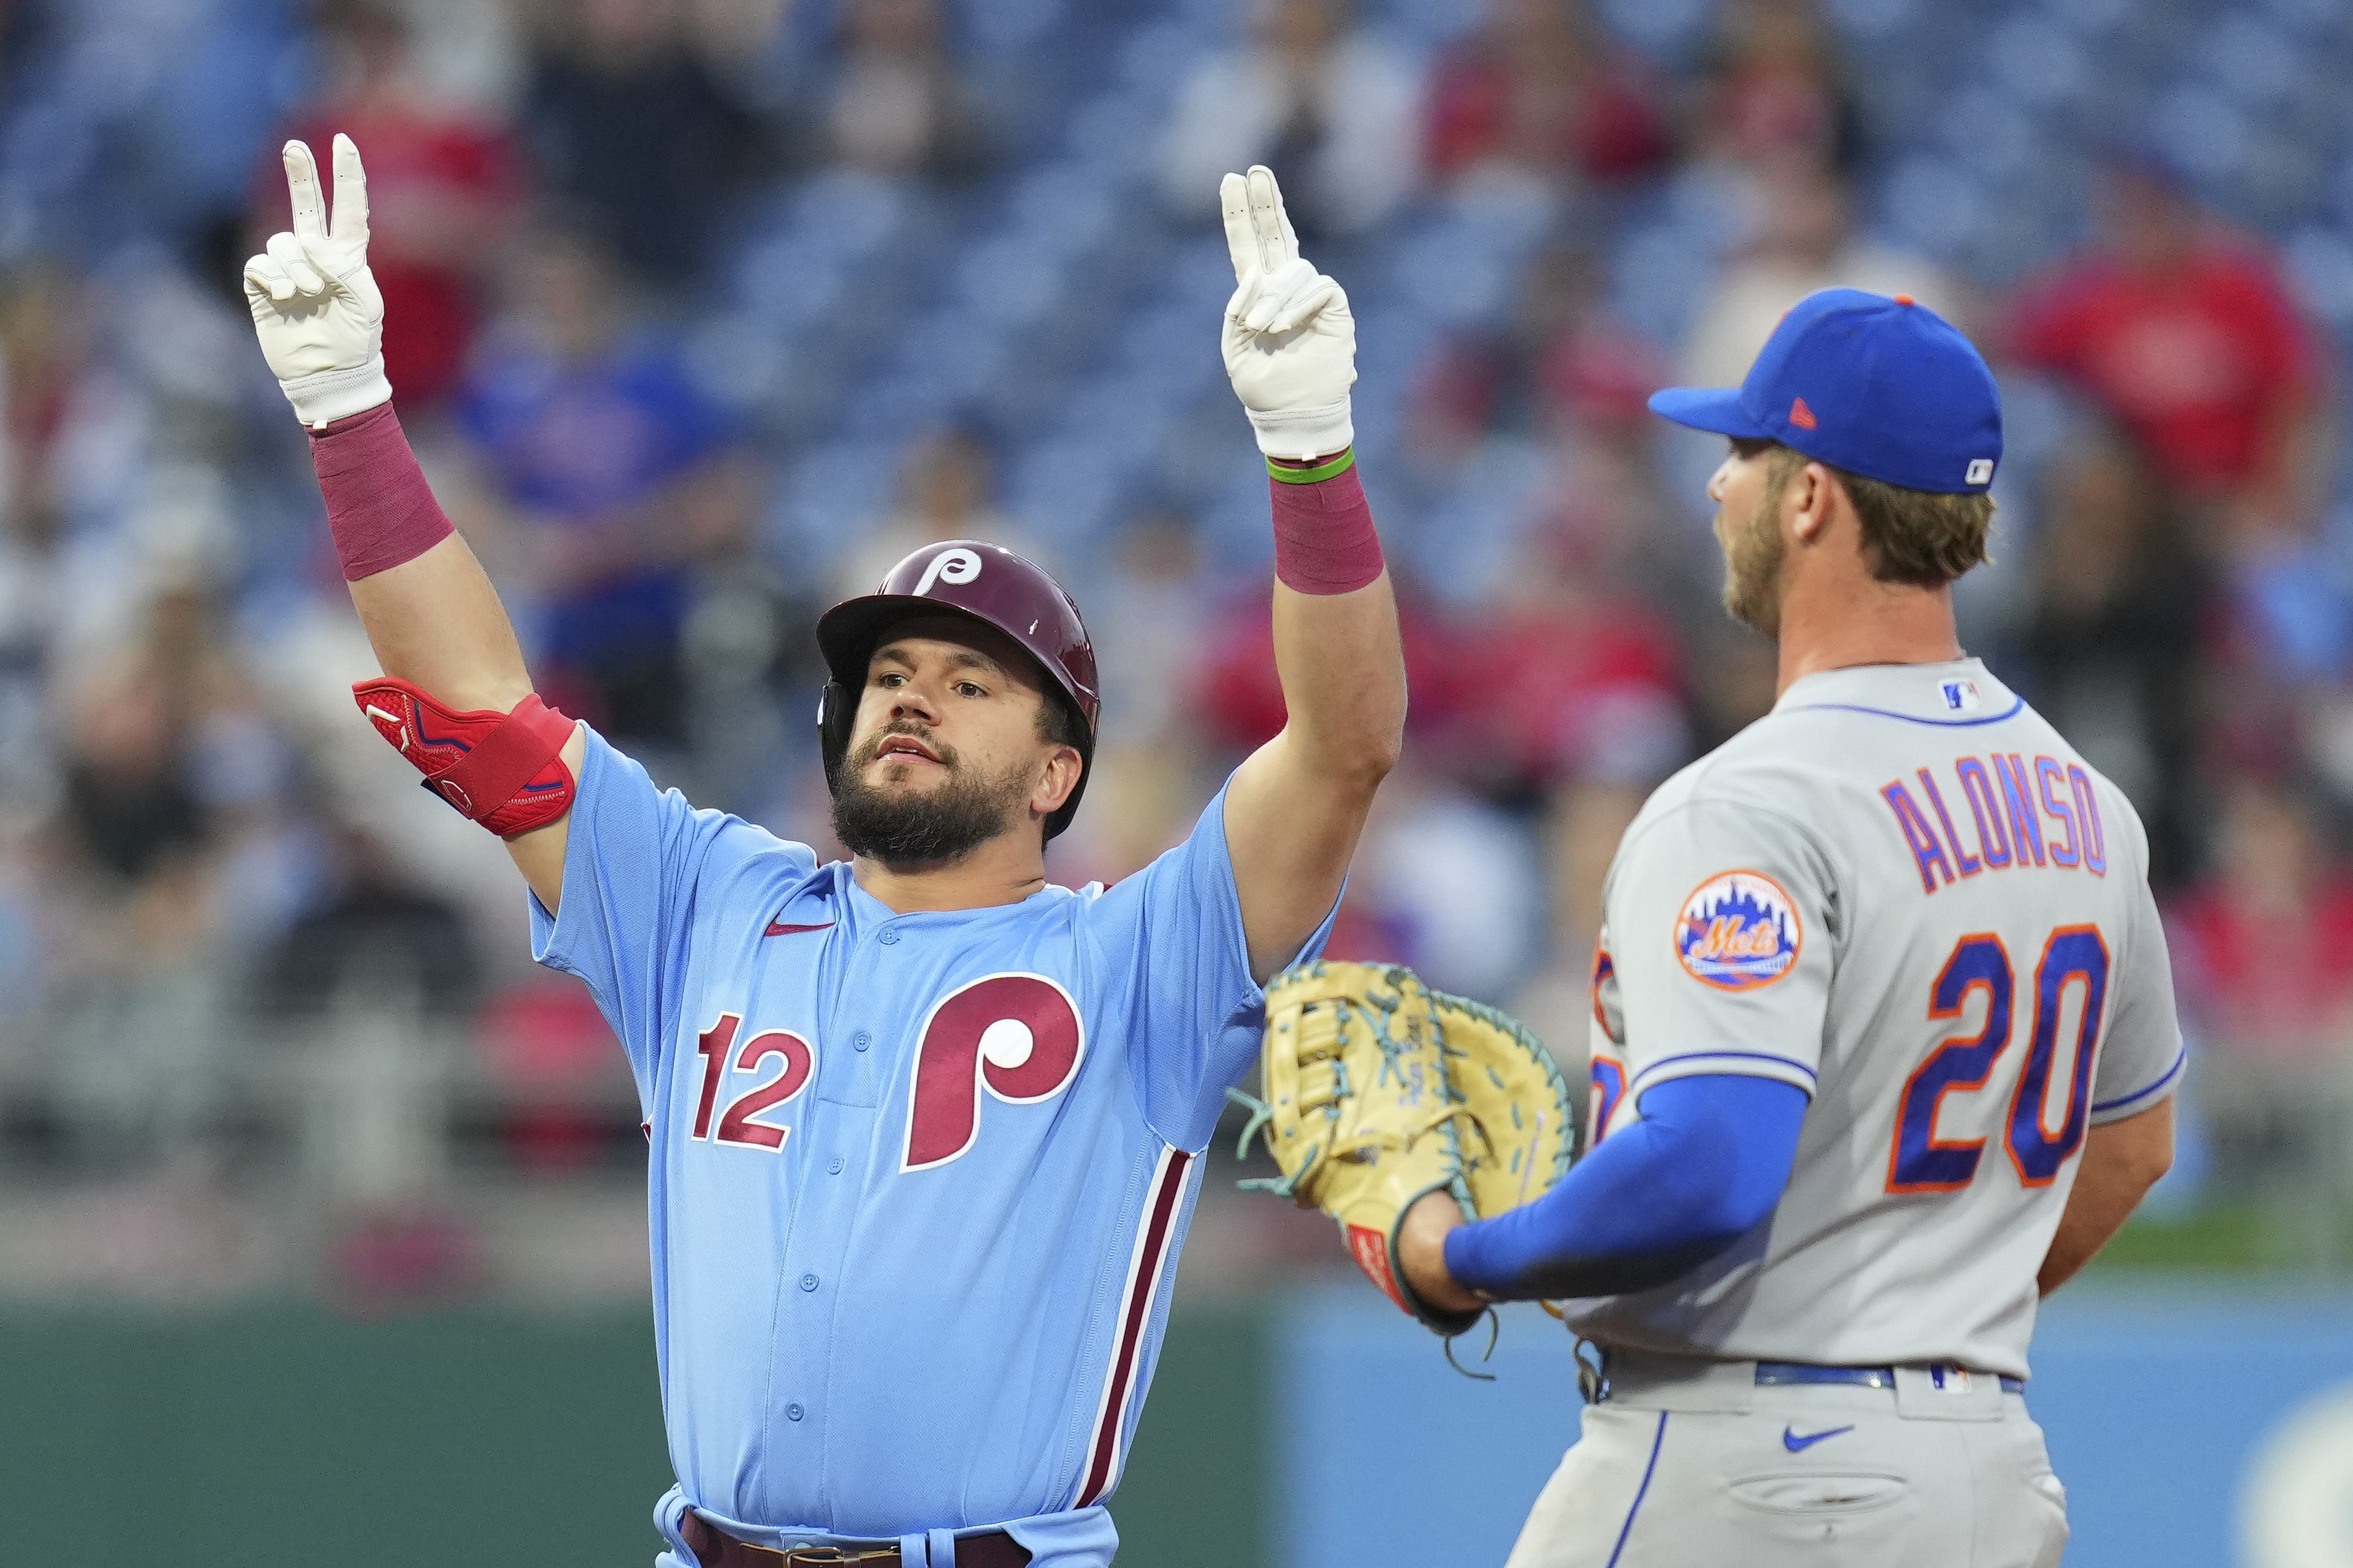 The Phillies could wear their powder blue uniforms for Game 5 of